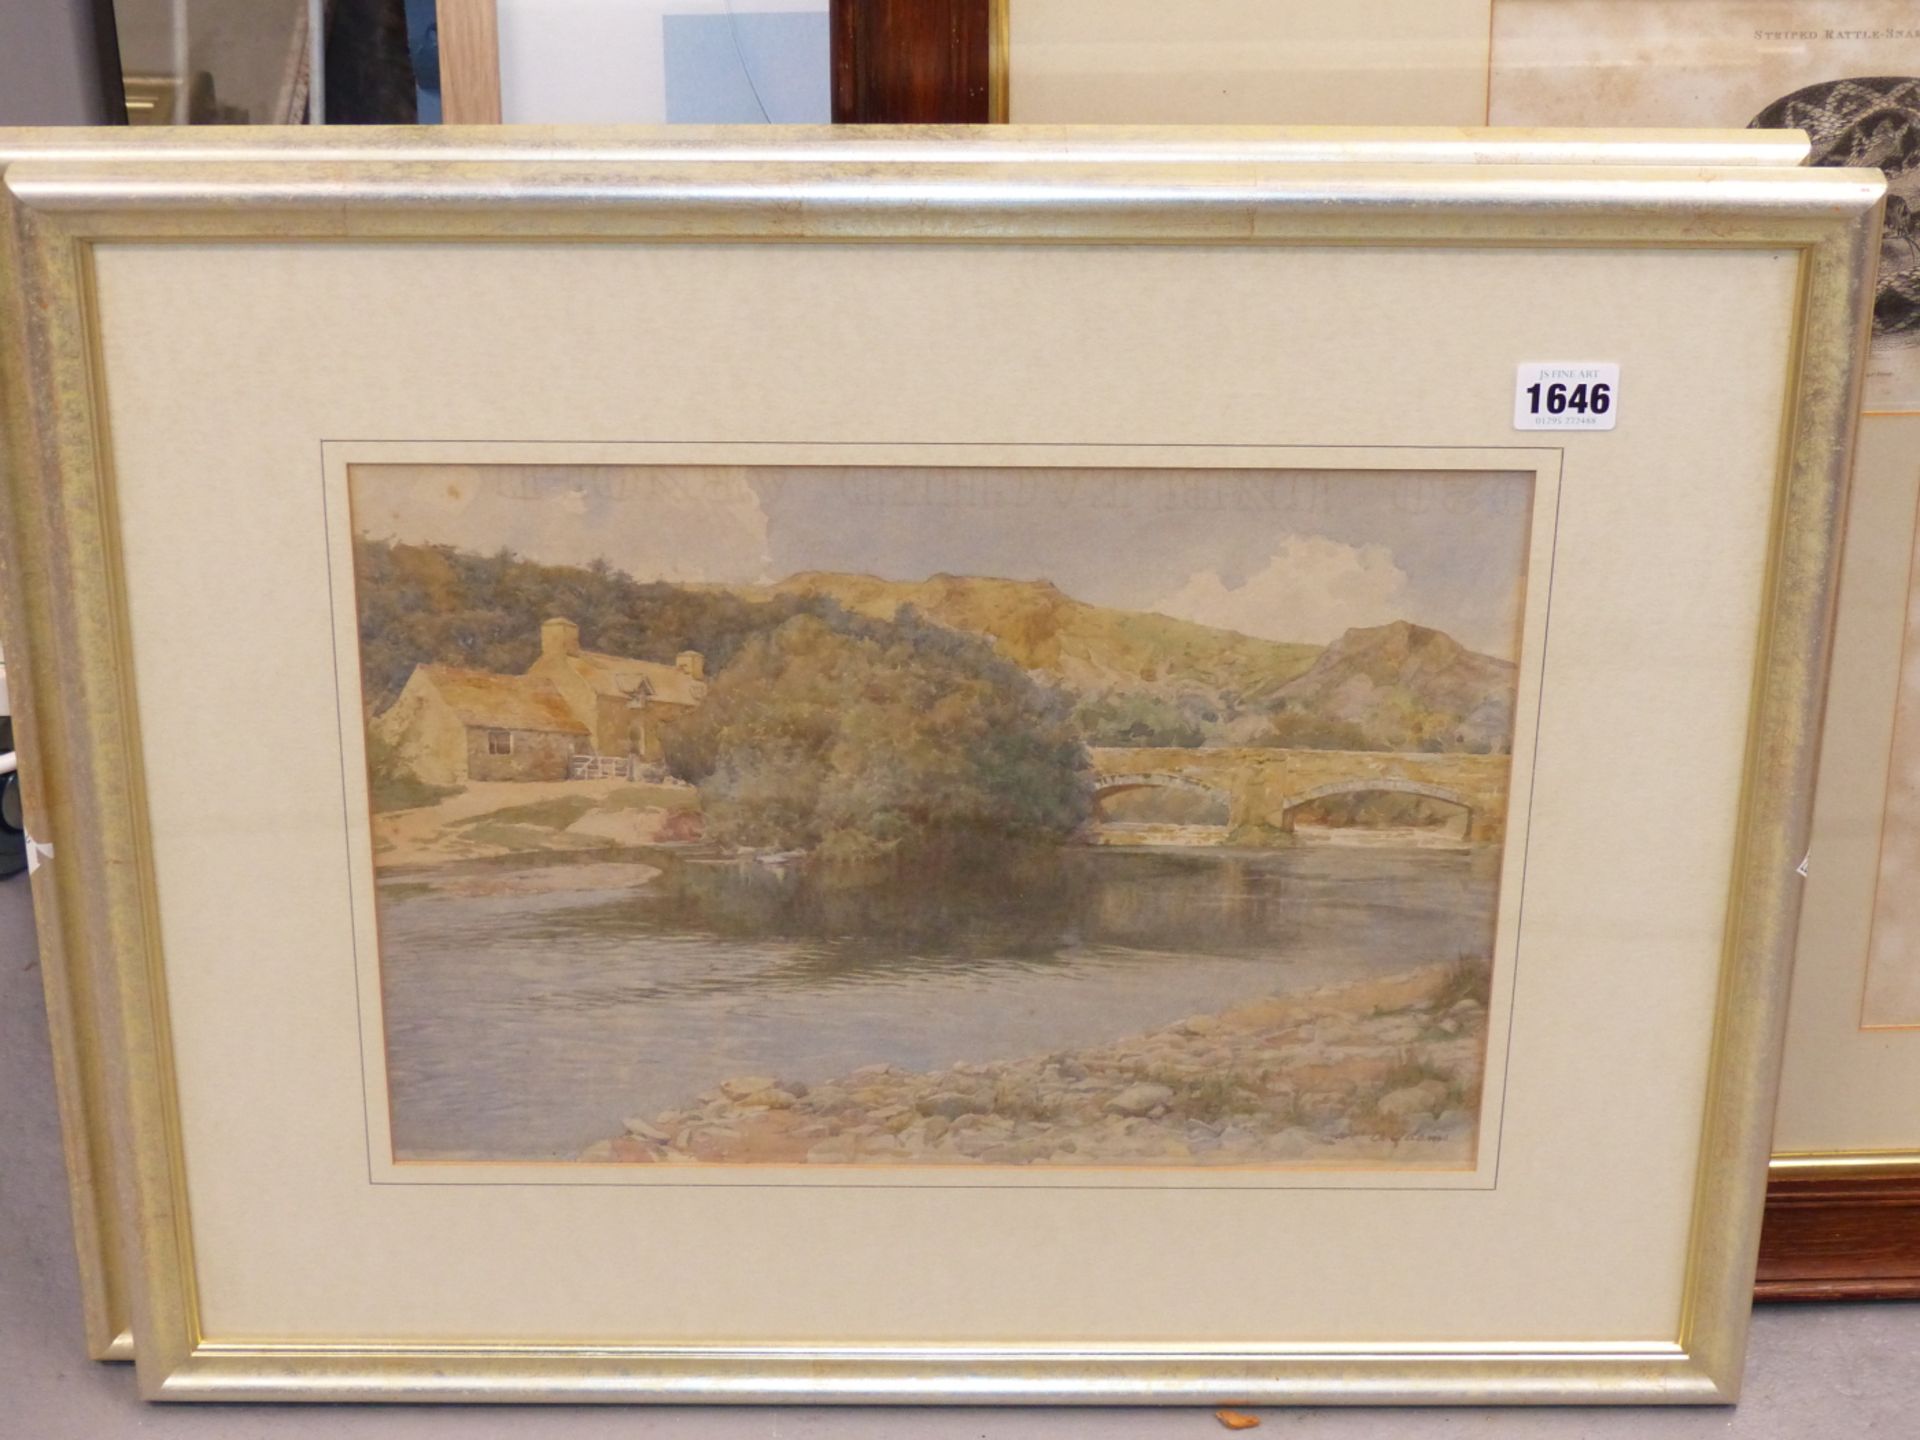 A. ADAMS (EARLY 20TH CENTURY) ROCKY MOUNTAINOUS LANDSCAPE WATERCOLOUR SIGNED L/L. TOGETHER WITH A - Image 3 of 10